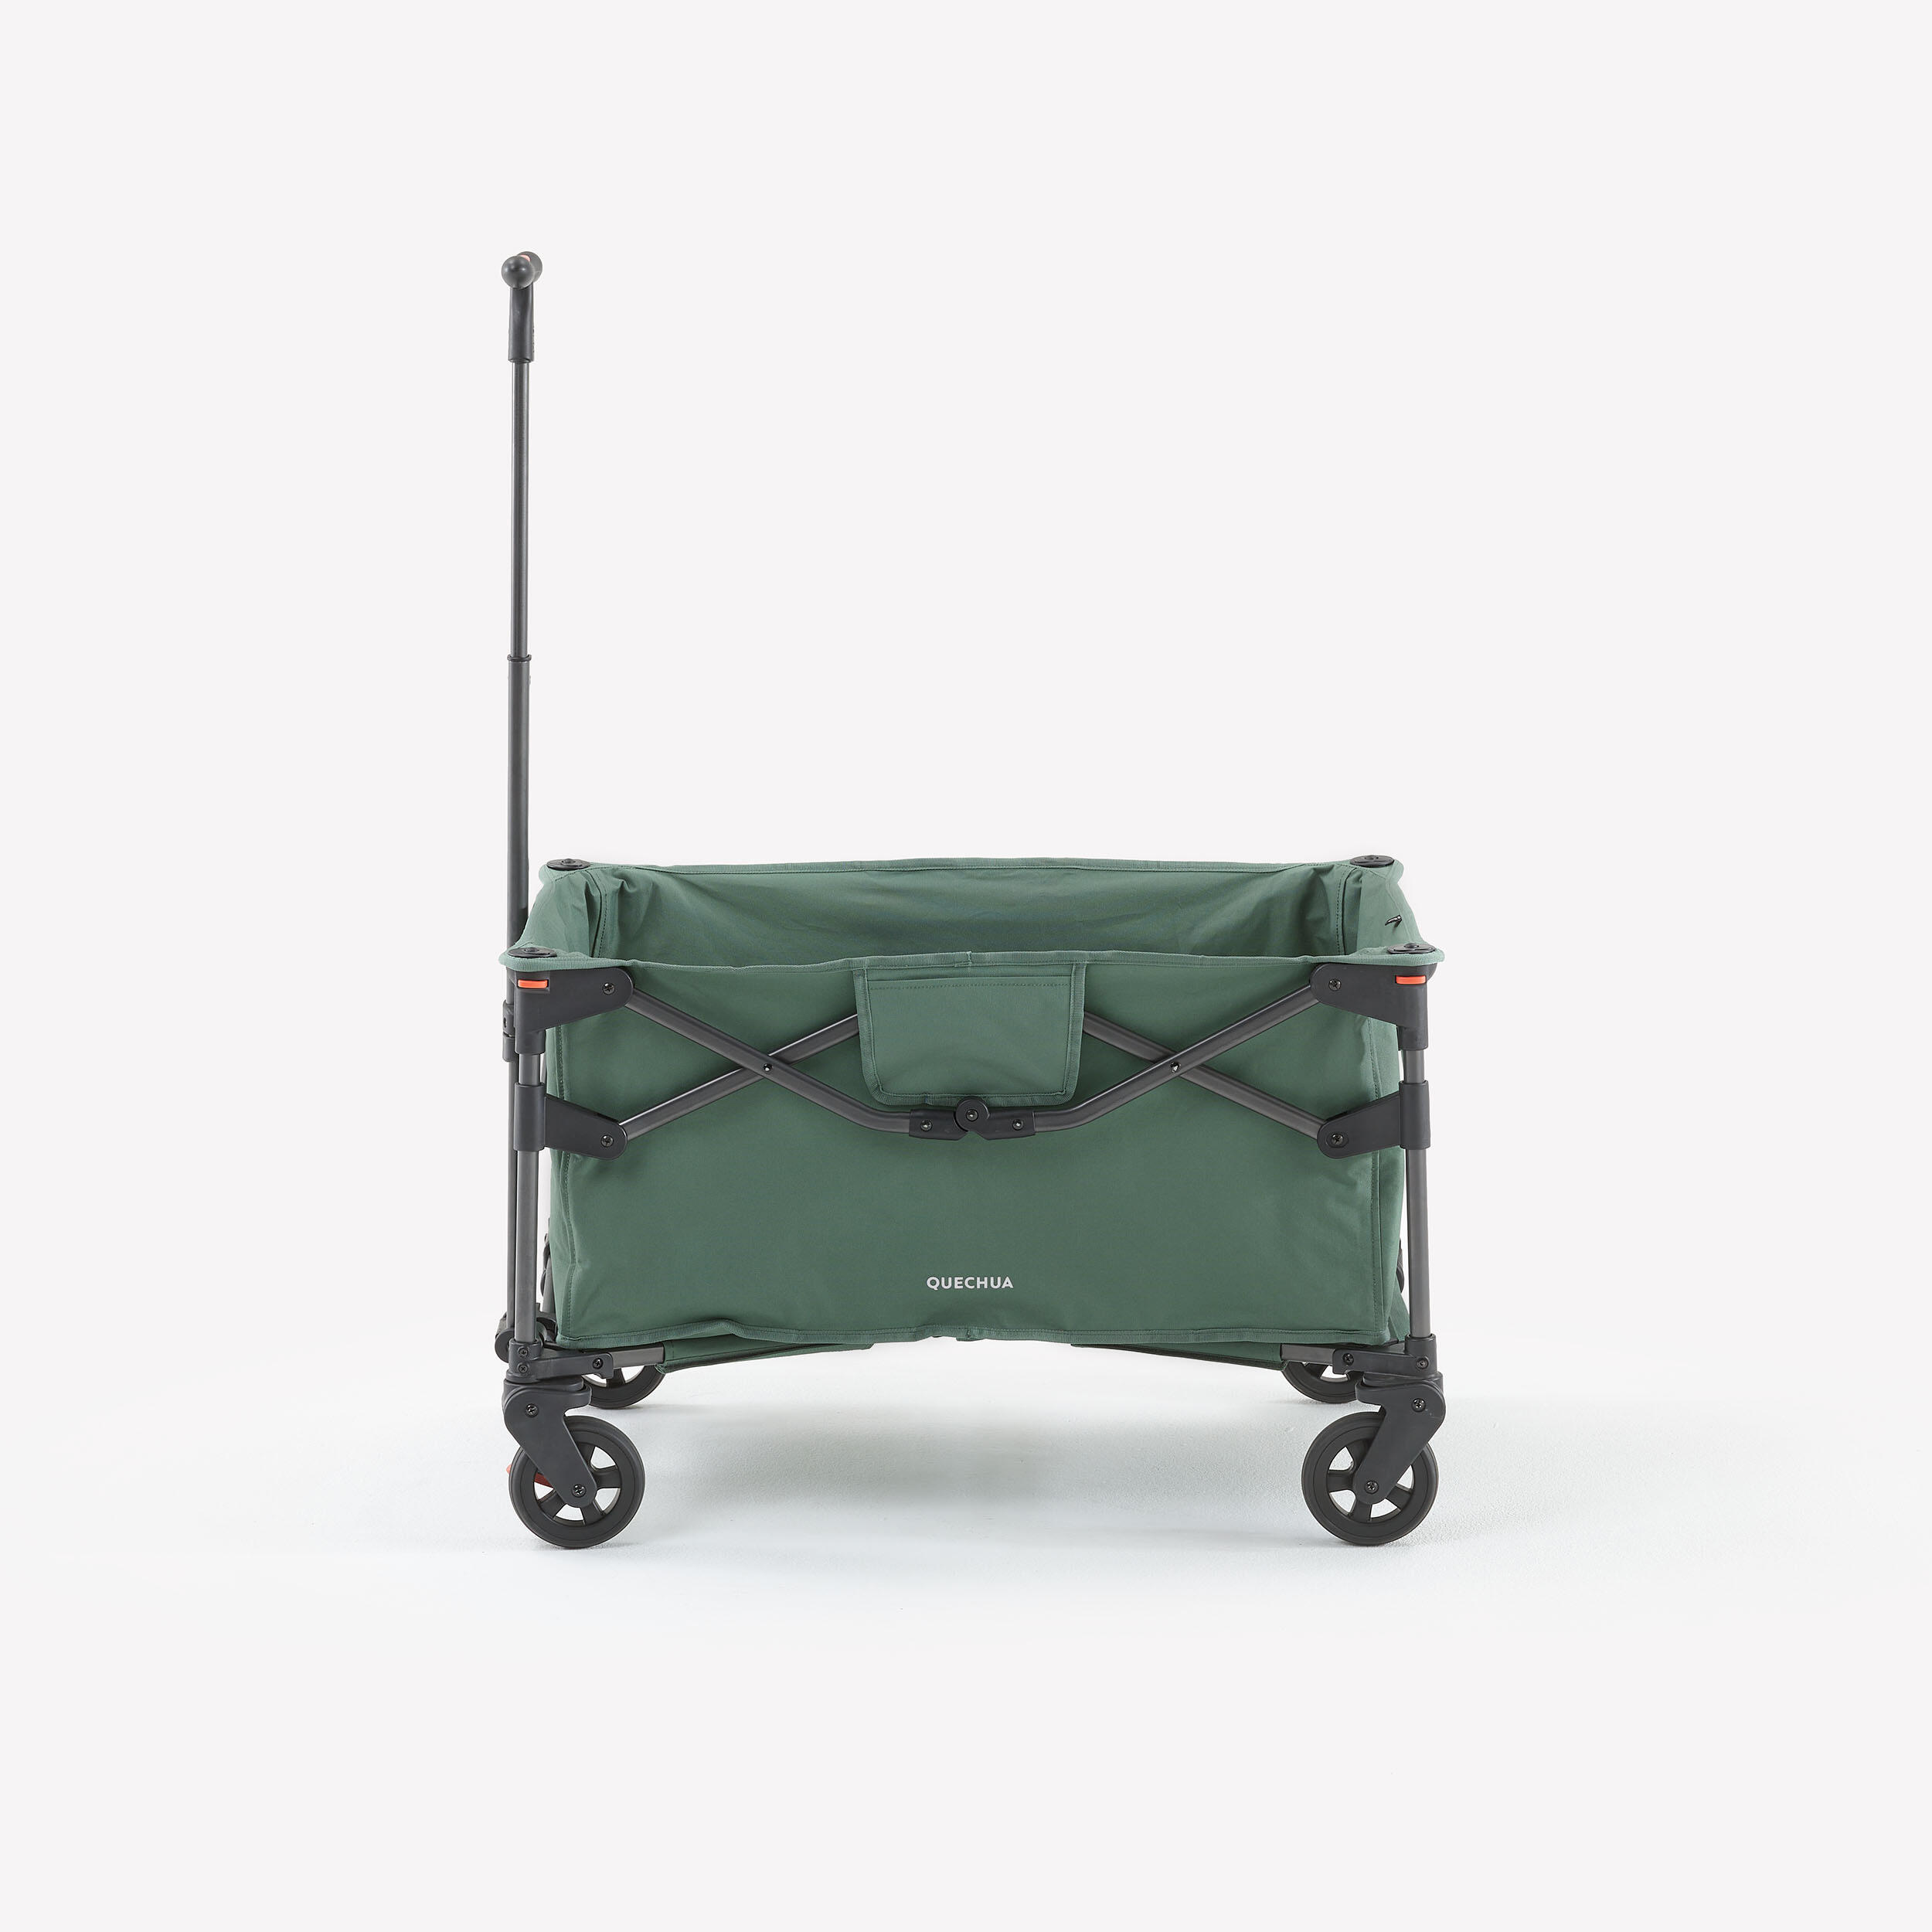 COMPACT TROLLEY FOR TRANSPORTING CAMPING EQUIPMENT - ULTRA-COMPACT TROLLEY 5/6